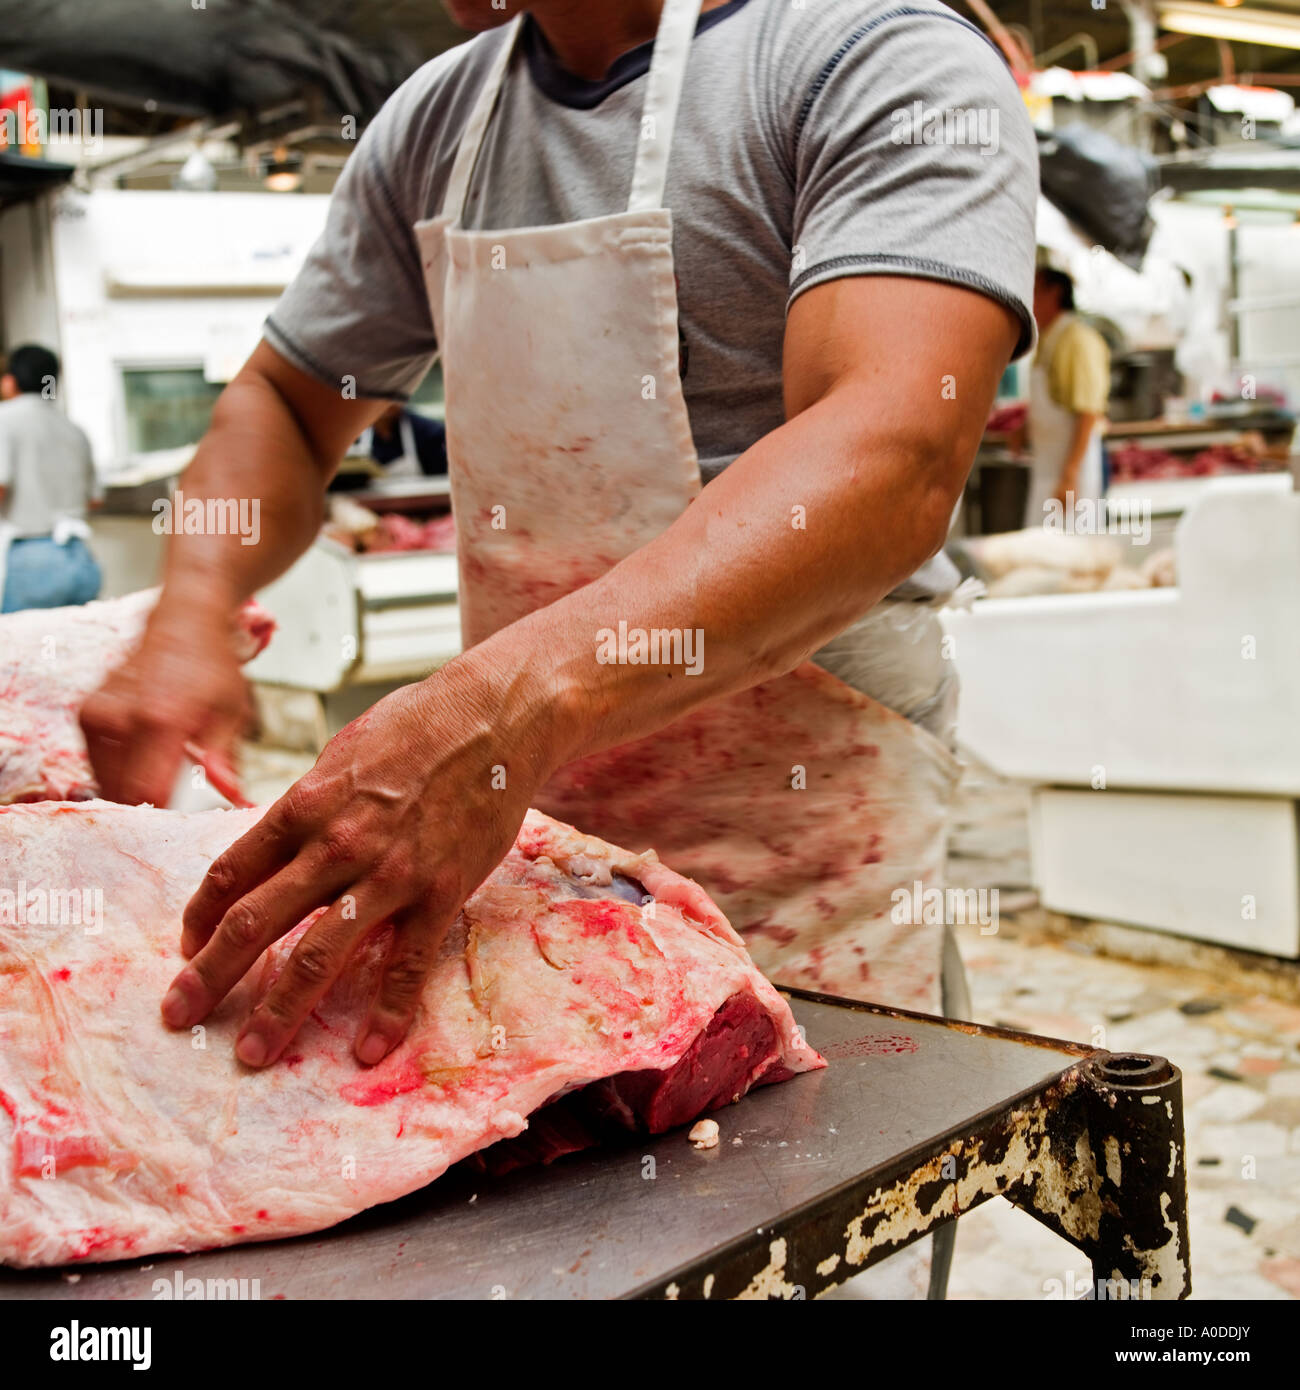 Strong arm of a butcher preparing meat No model release required, crop, blur, distance means people unrecognizable Stock Photo